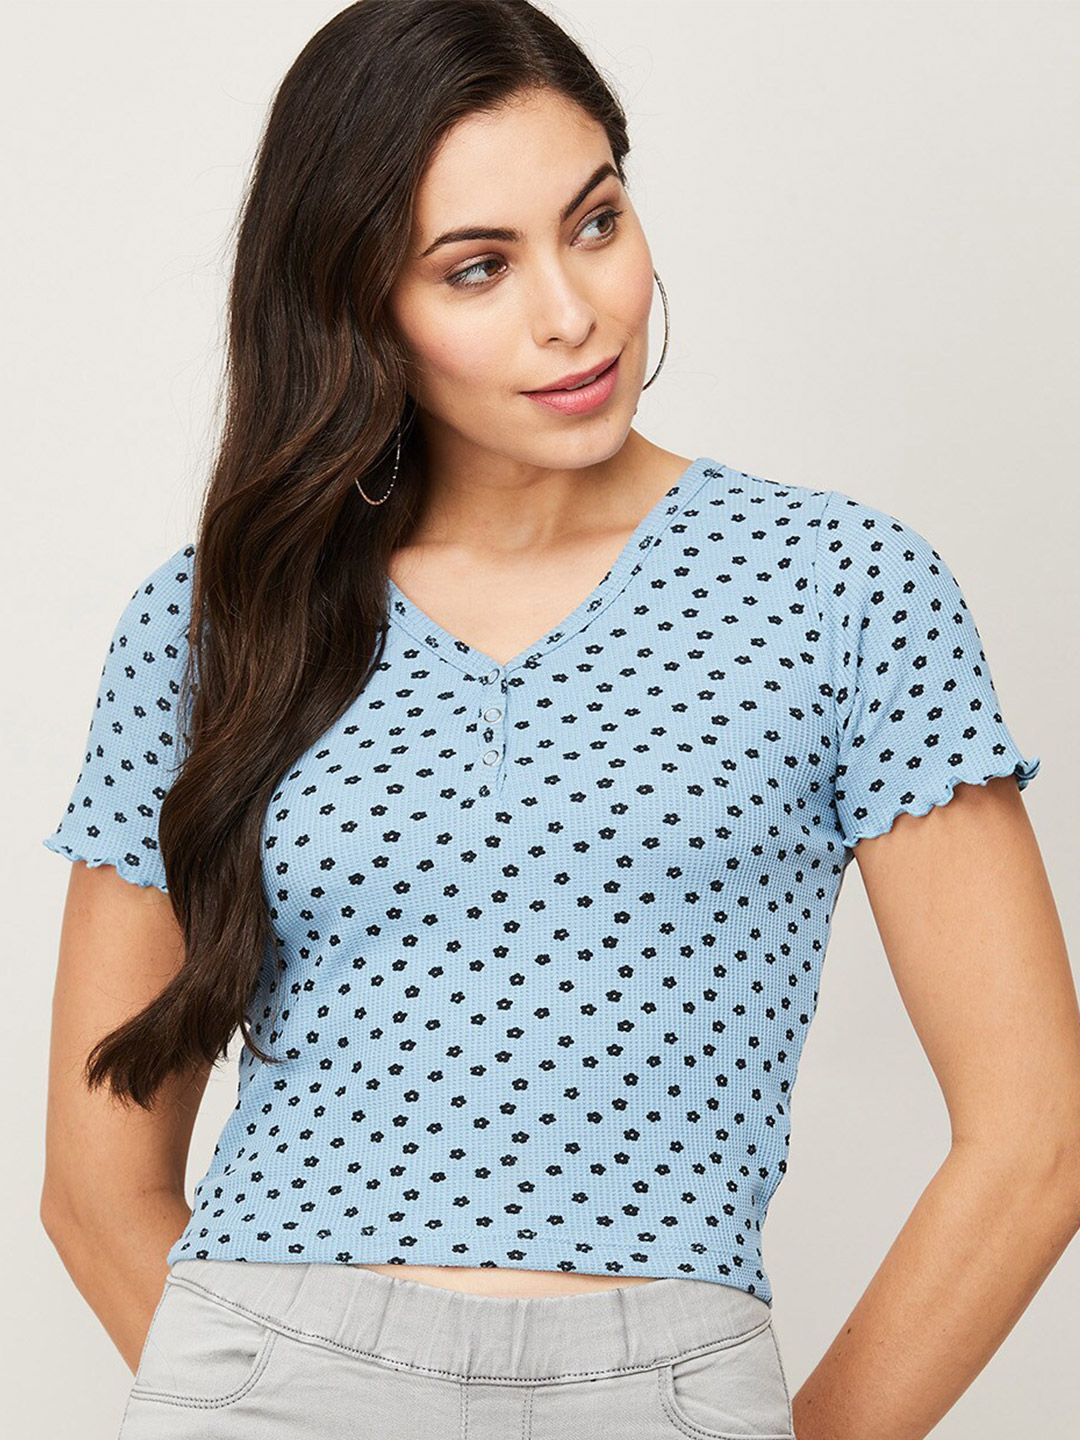 Ginger by Lifestyle Blue Geometric Print Crop Top Price in India